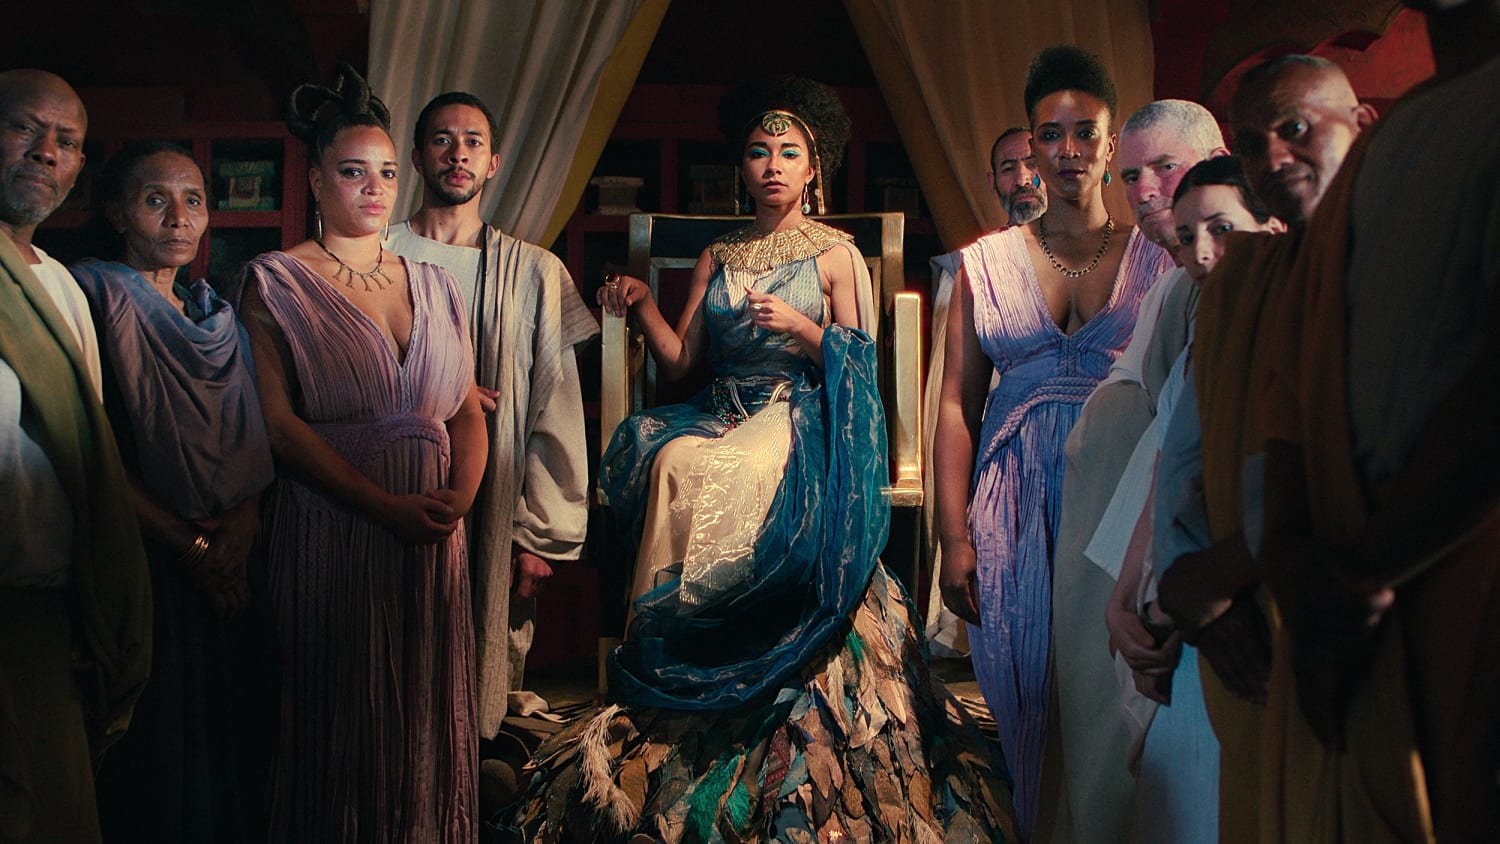 Why Egyptians Hate Netflix's Queen Cleopatra